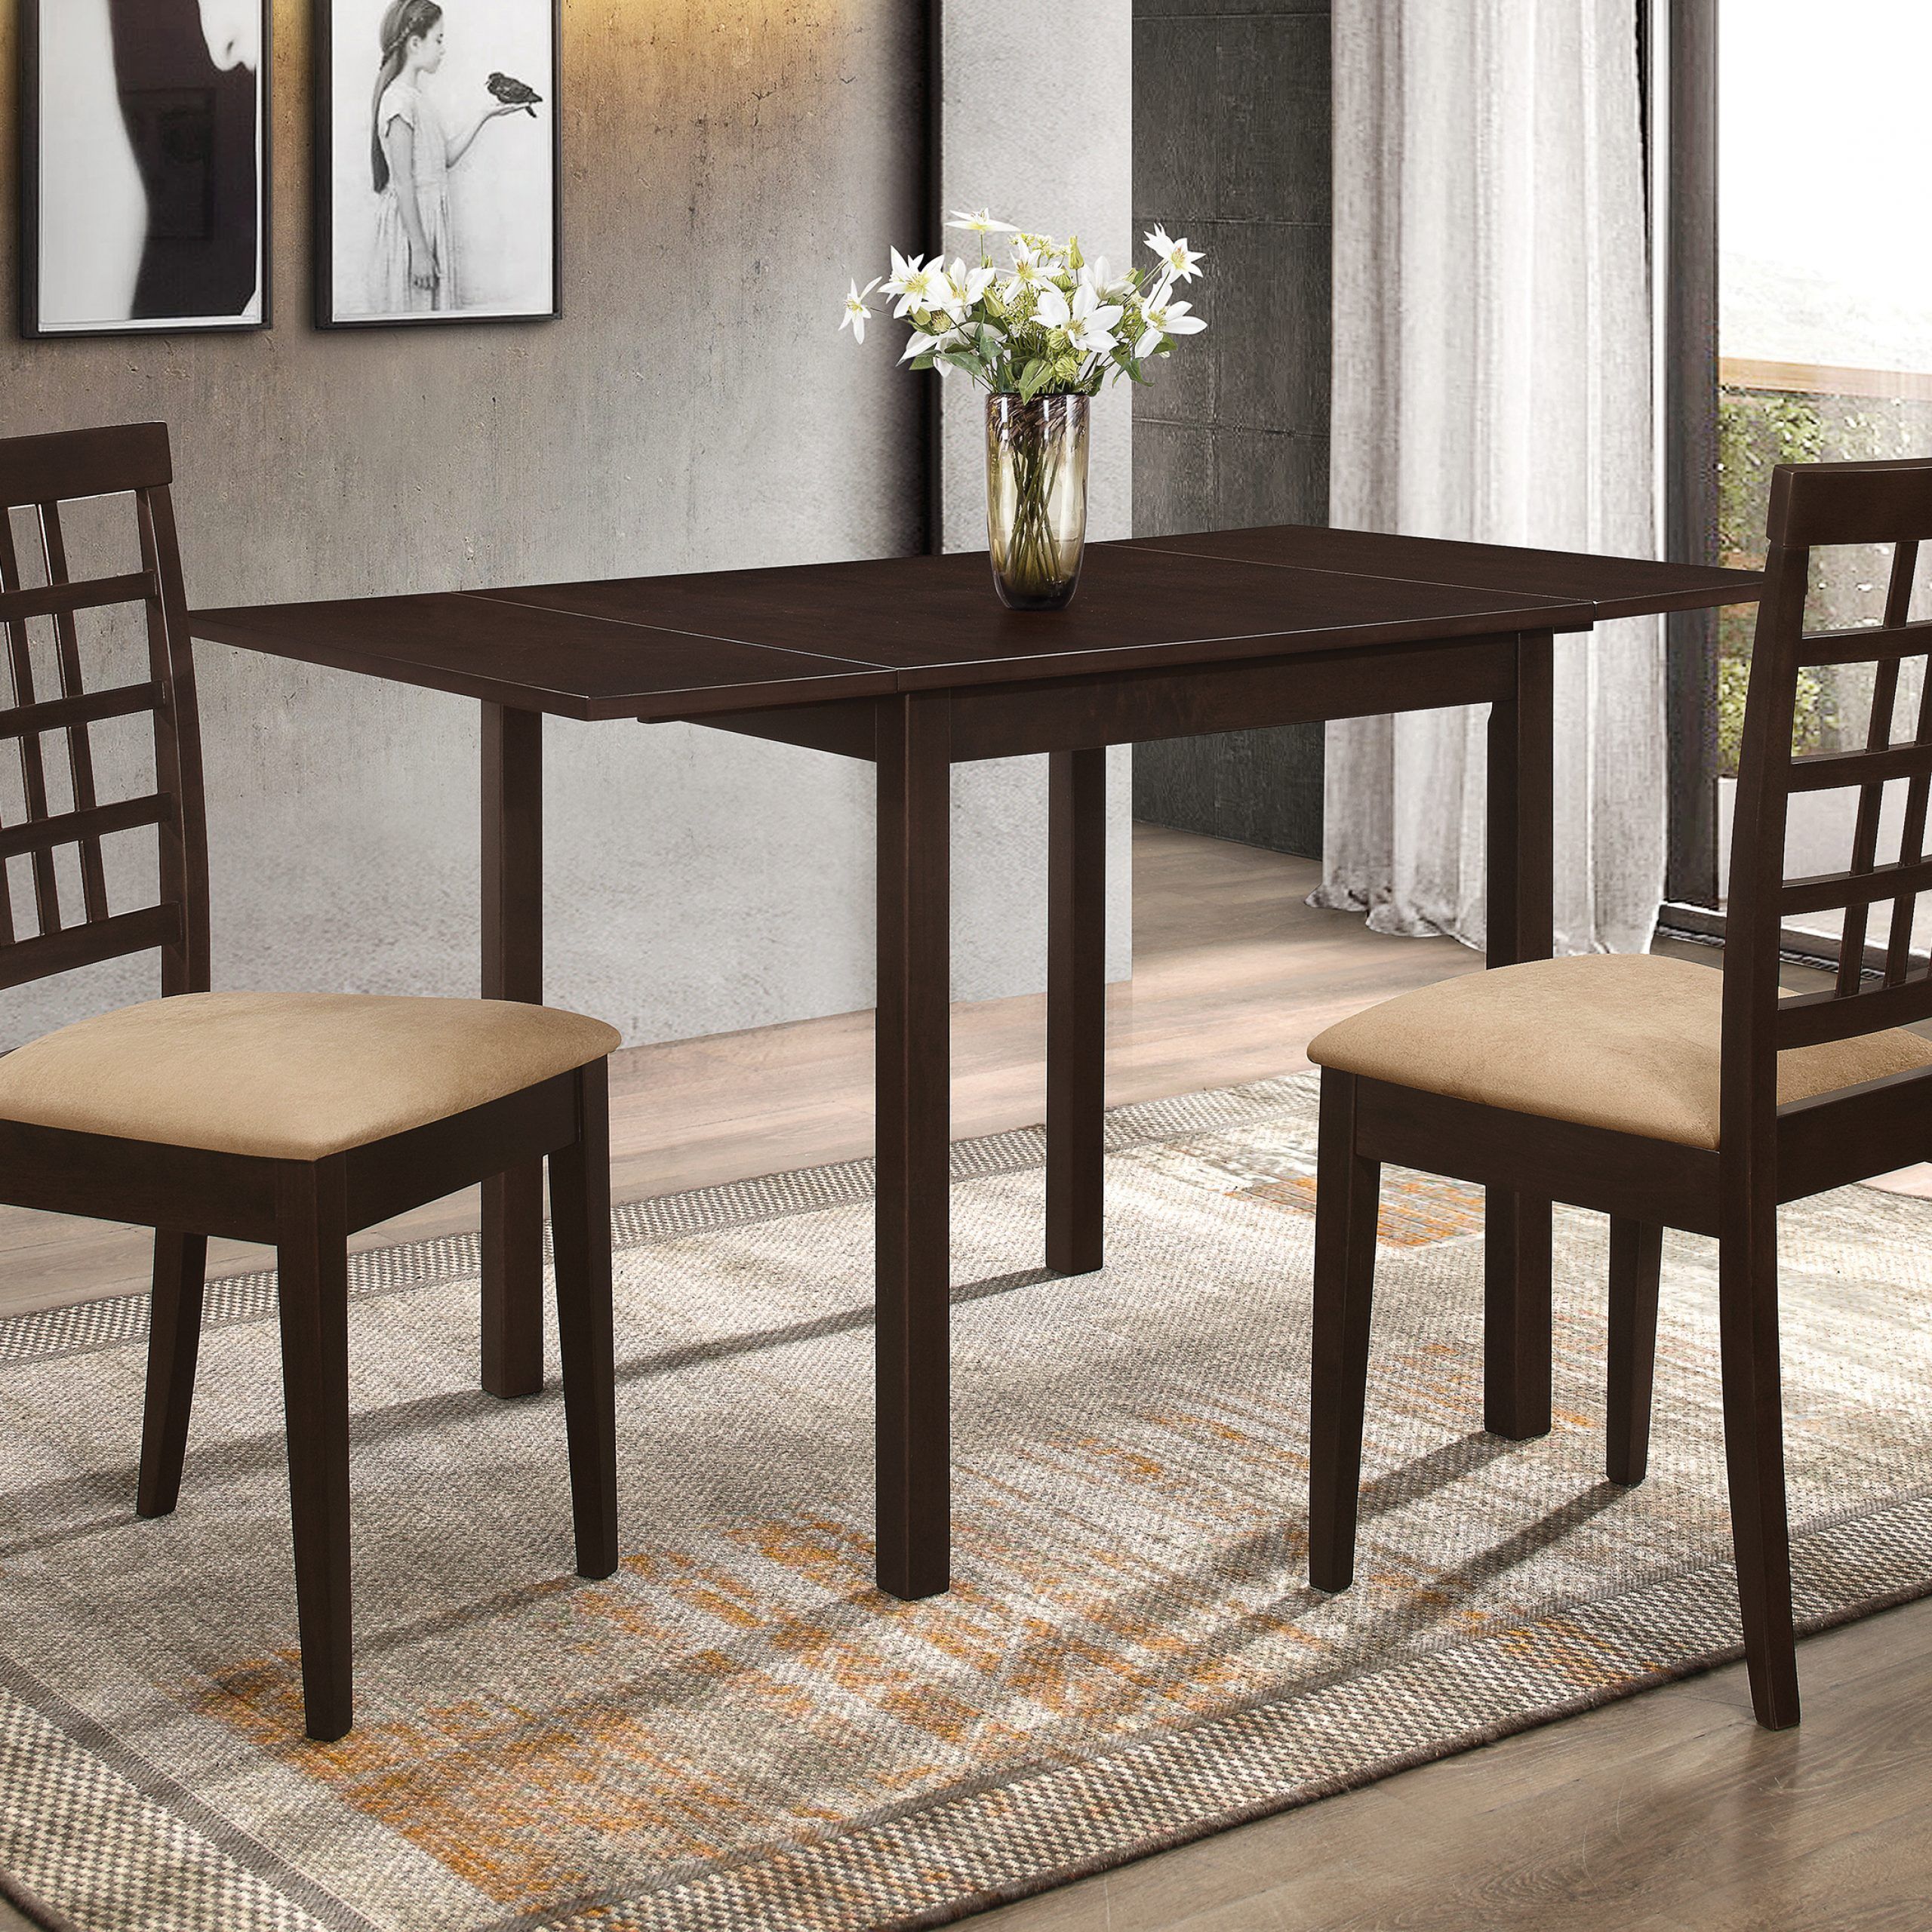 Famous Kelso Rectangular Dining Table With Drop Leaf Cappuccino Intended For Transitional Drop Leaf Casual Dining Tables (View 6 of 30)